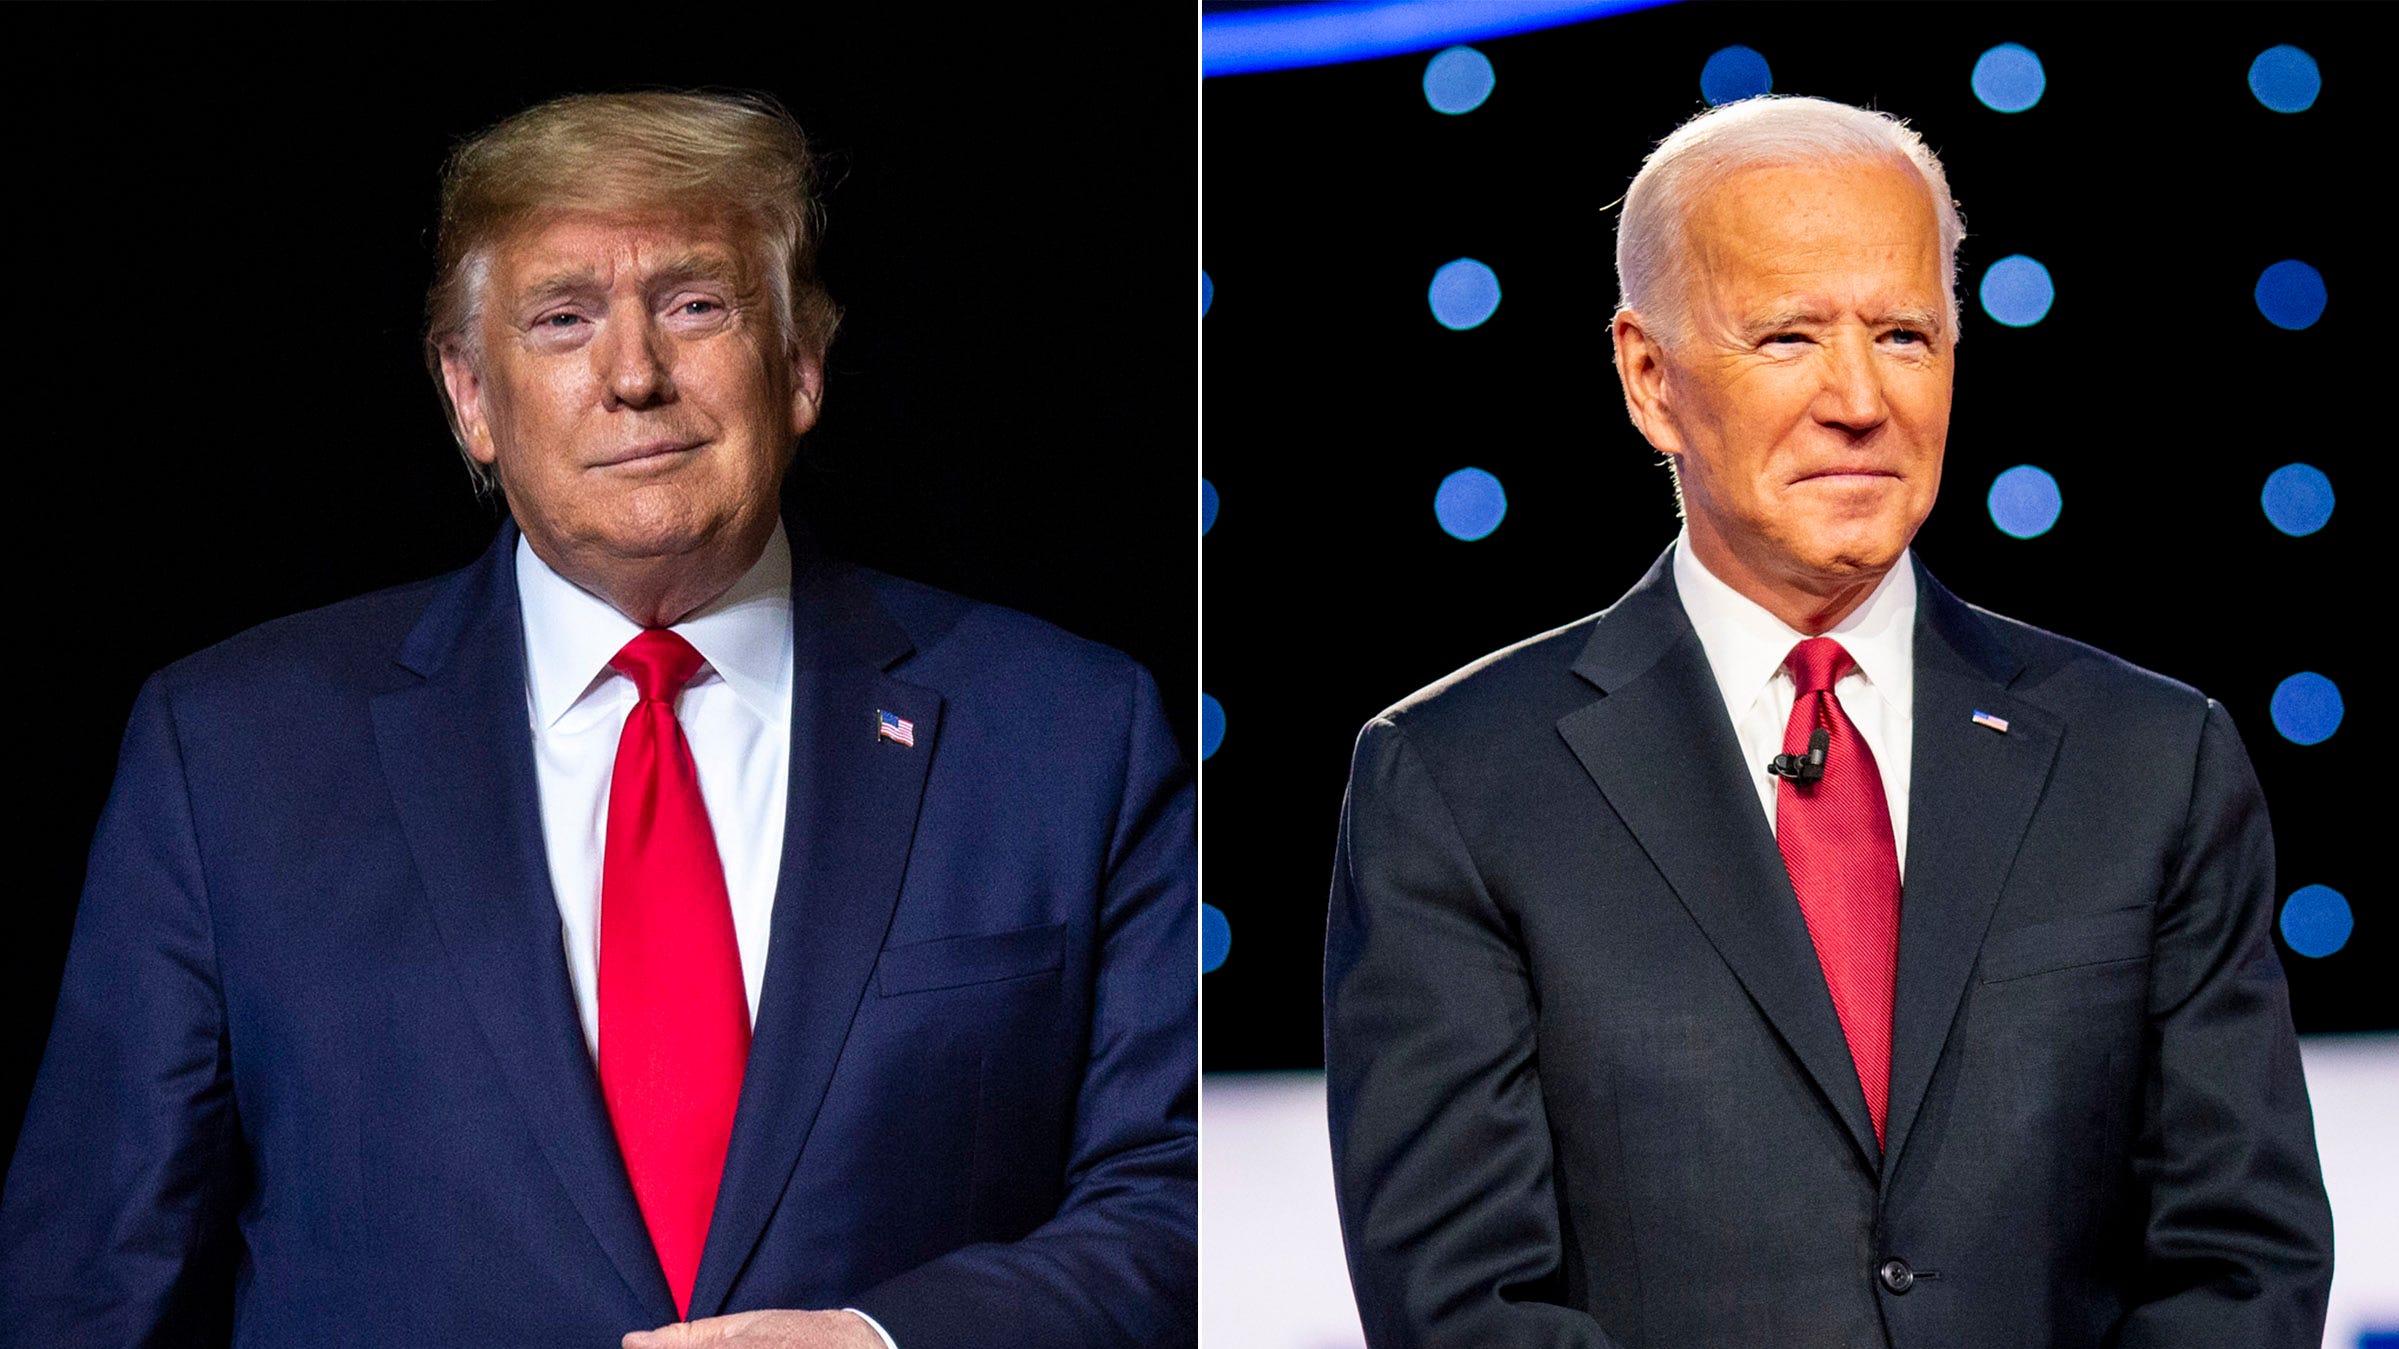 US Election: Twitter Flags Trump’s Tweet Accusing Biden's Democrats Of Trying To 'Steal' Election